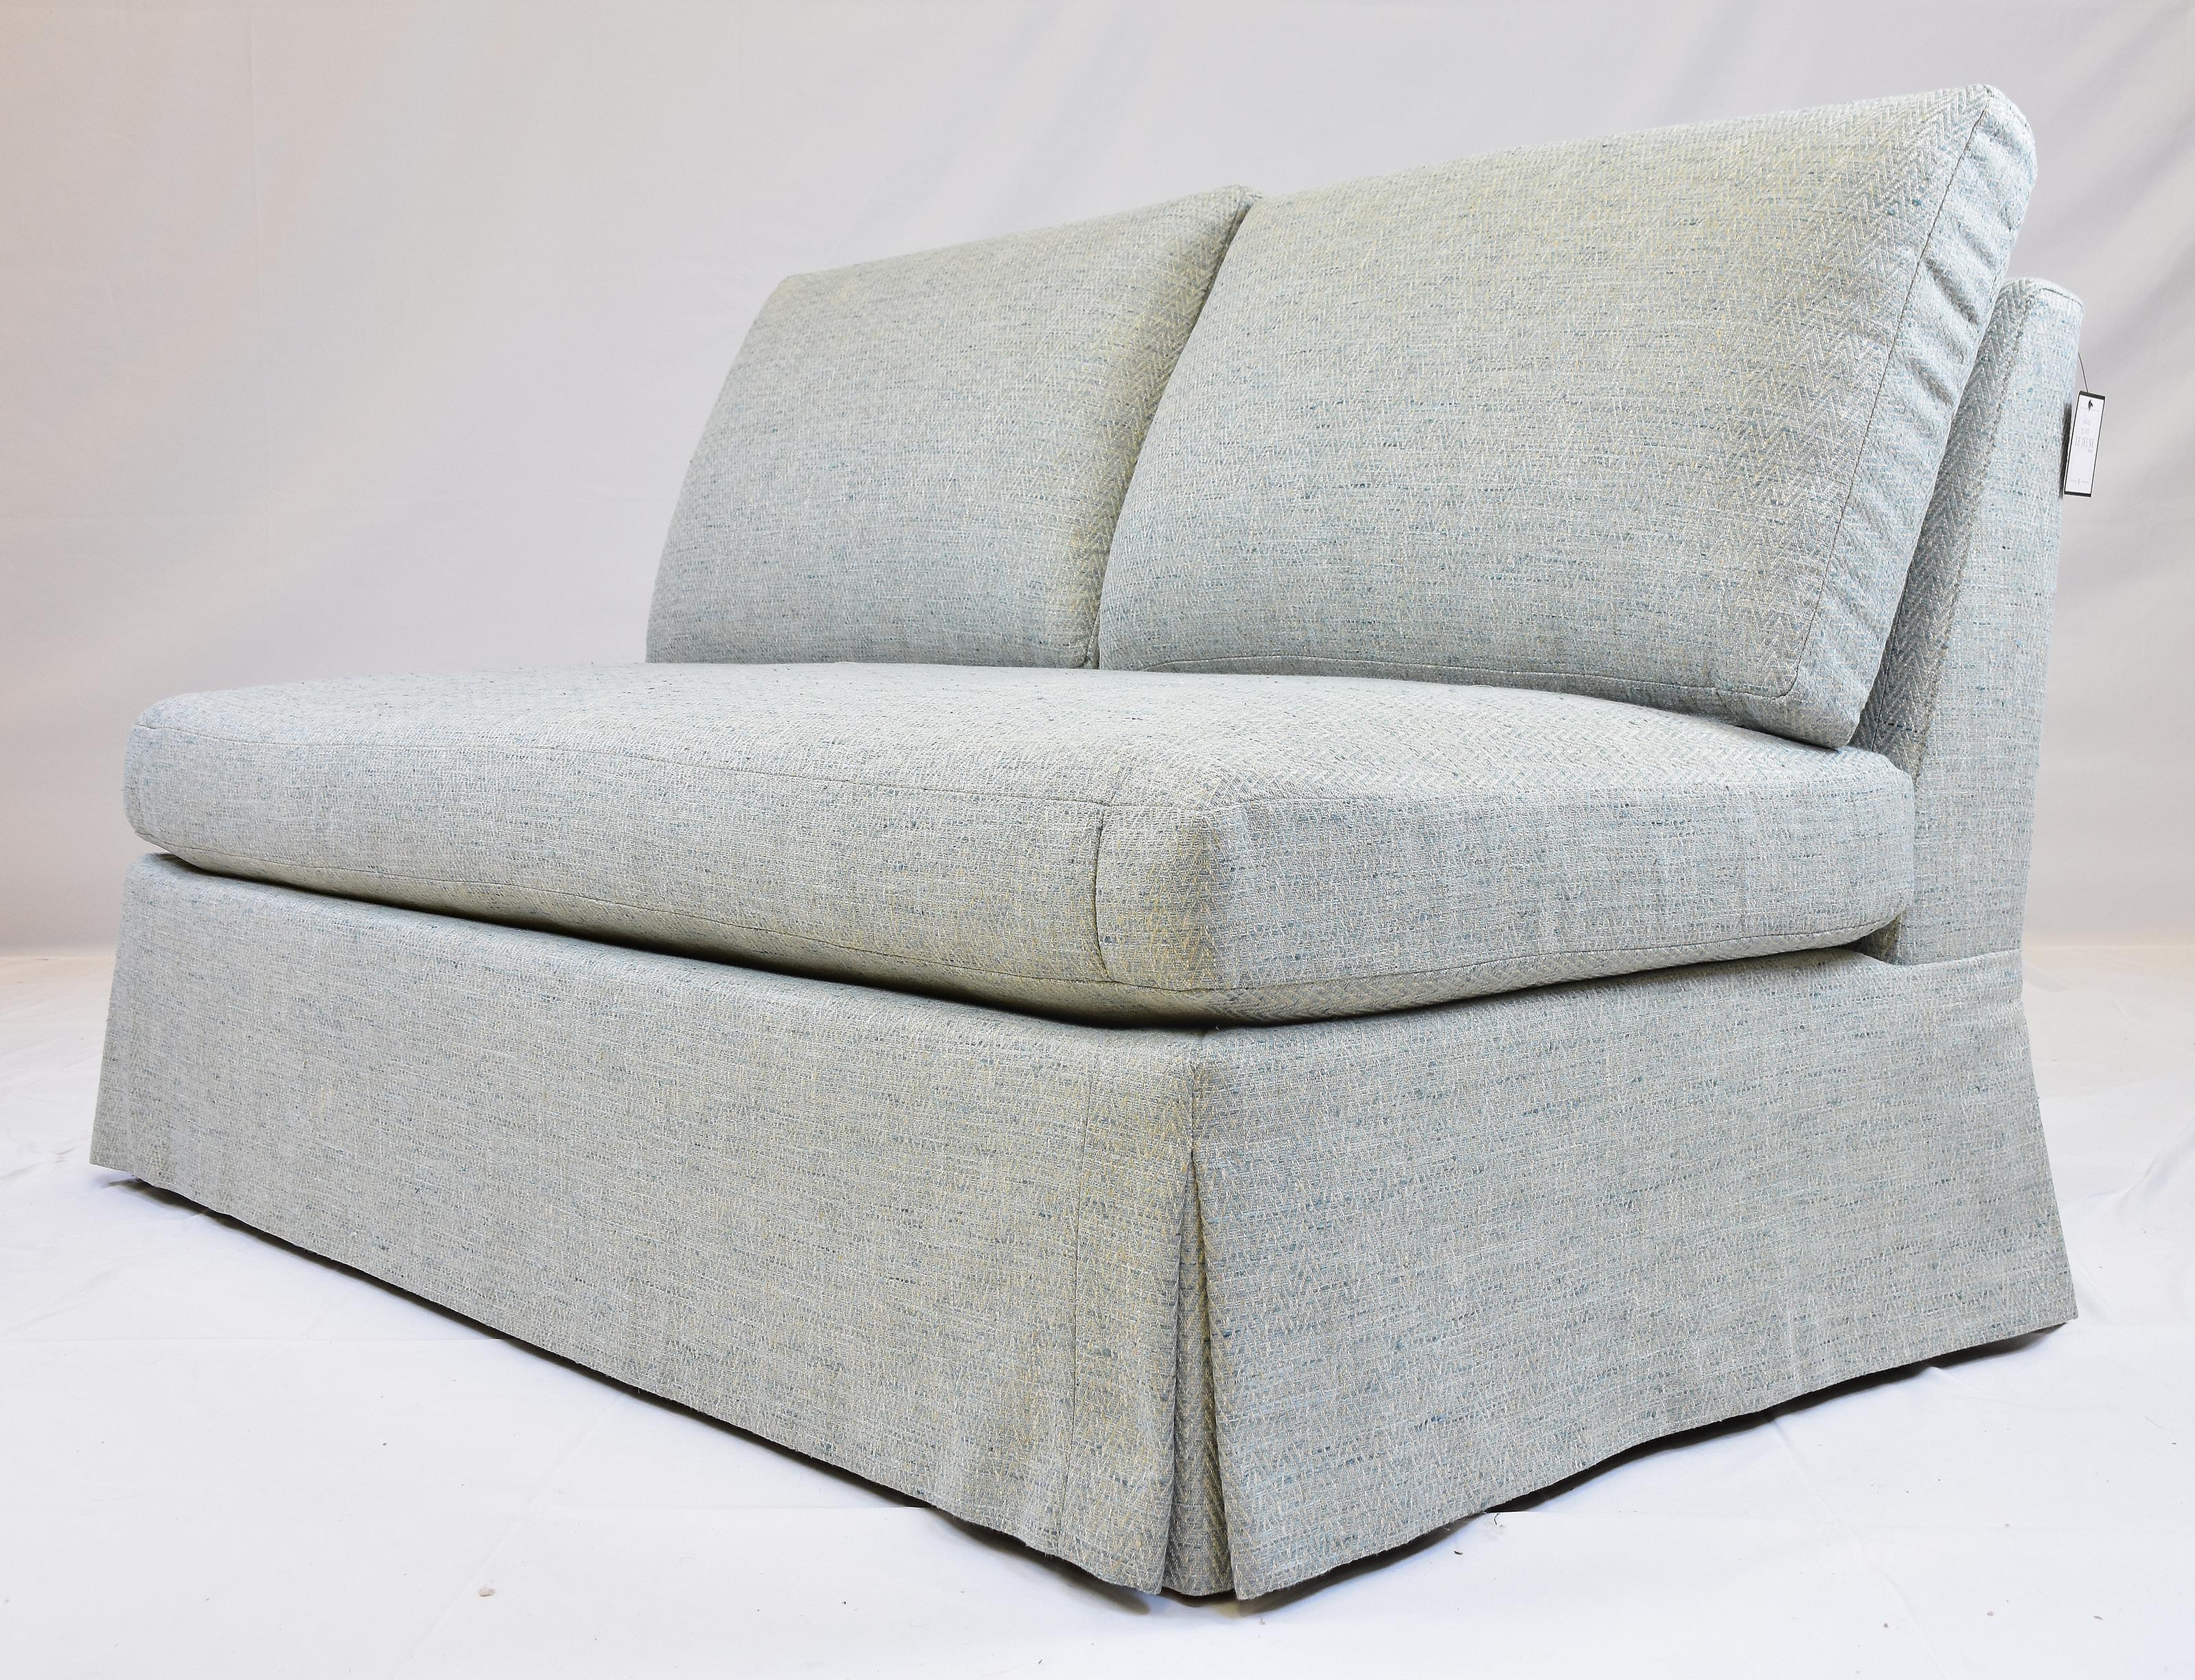 Le Jeune Upholstery Gracie 2 Seat Sofa Showroom Model In Good Condition For Sale In Miami, FL